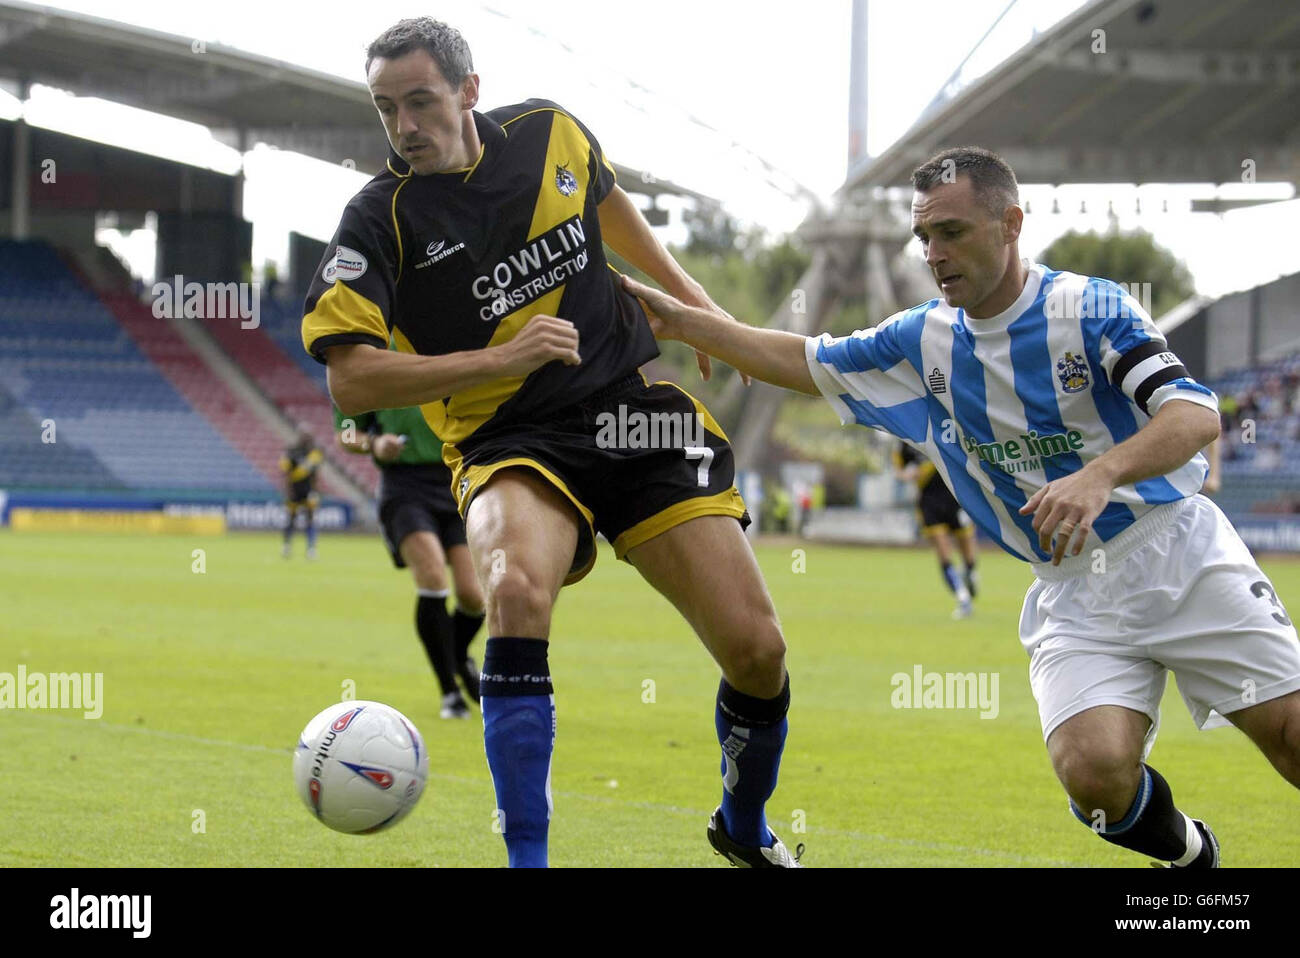 Huddersfield's captain, Rob Edwards takes on Bristol Rovers' Dave Savage (L), during their Nationwide Division Three match at Huddersfield's Alfred McAlpine Stadium. NO UNOFFICIAL CLUB WEBSITE USE. Stock Photo